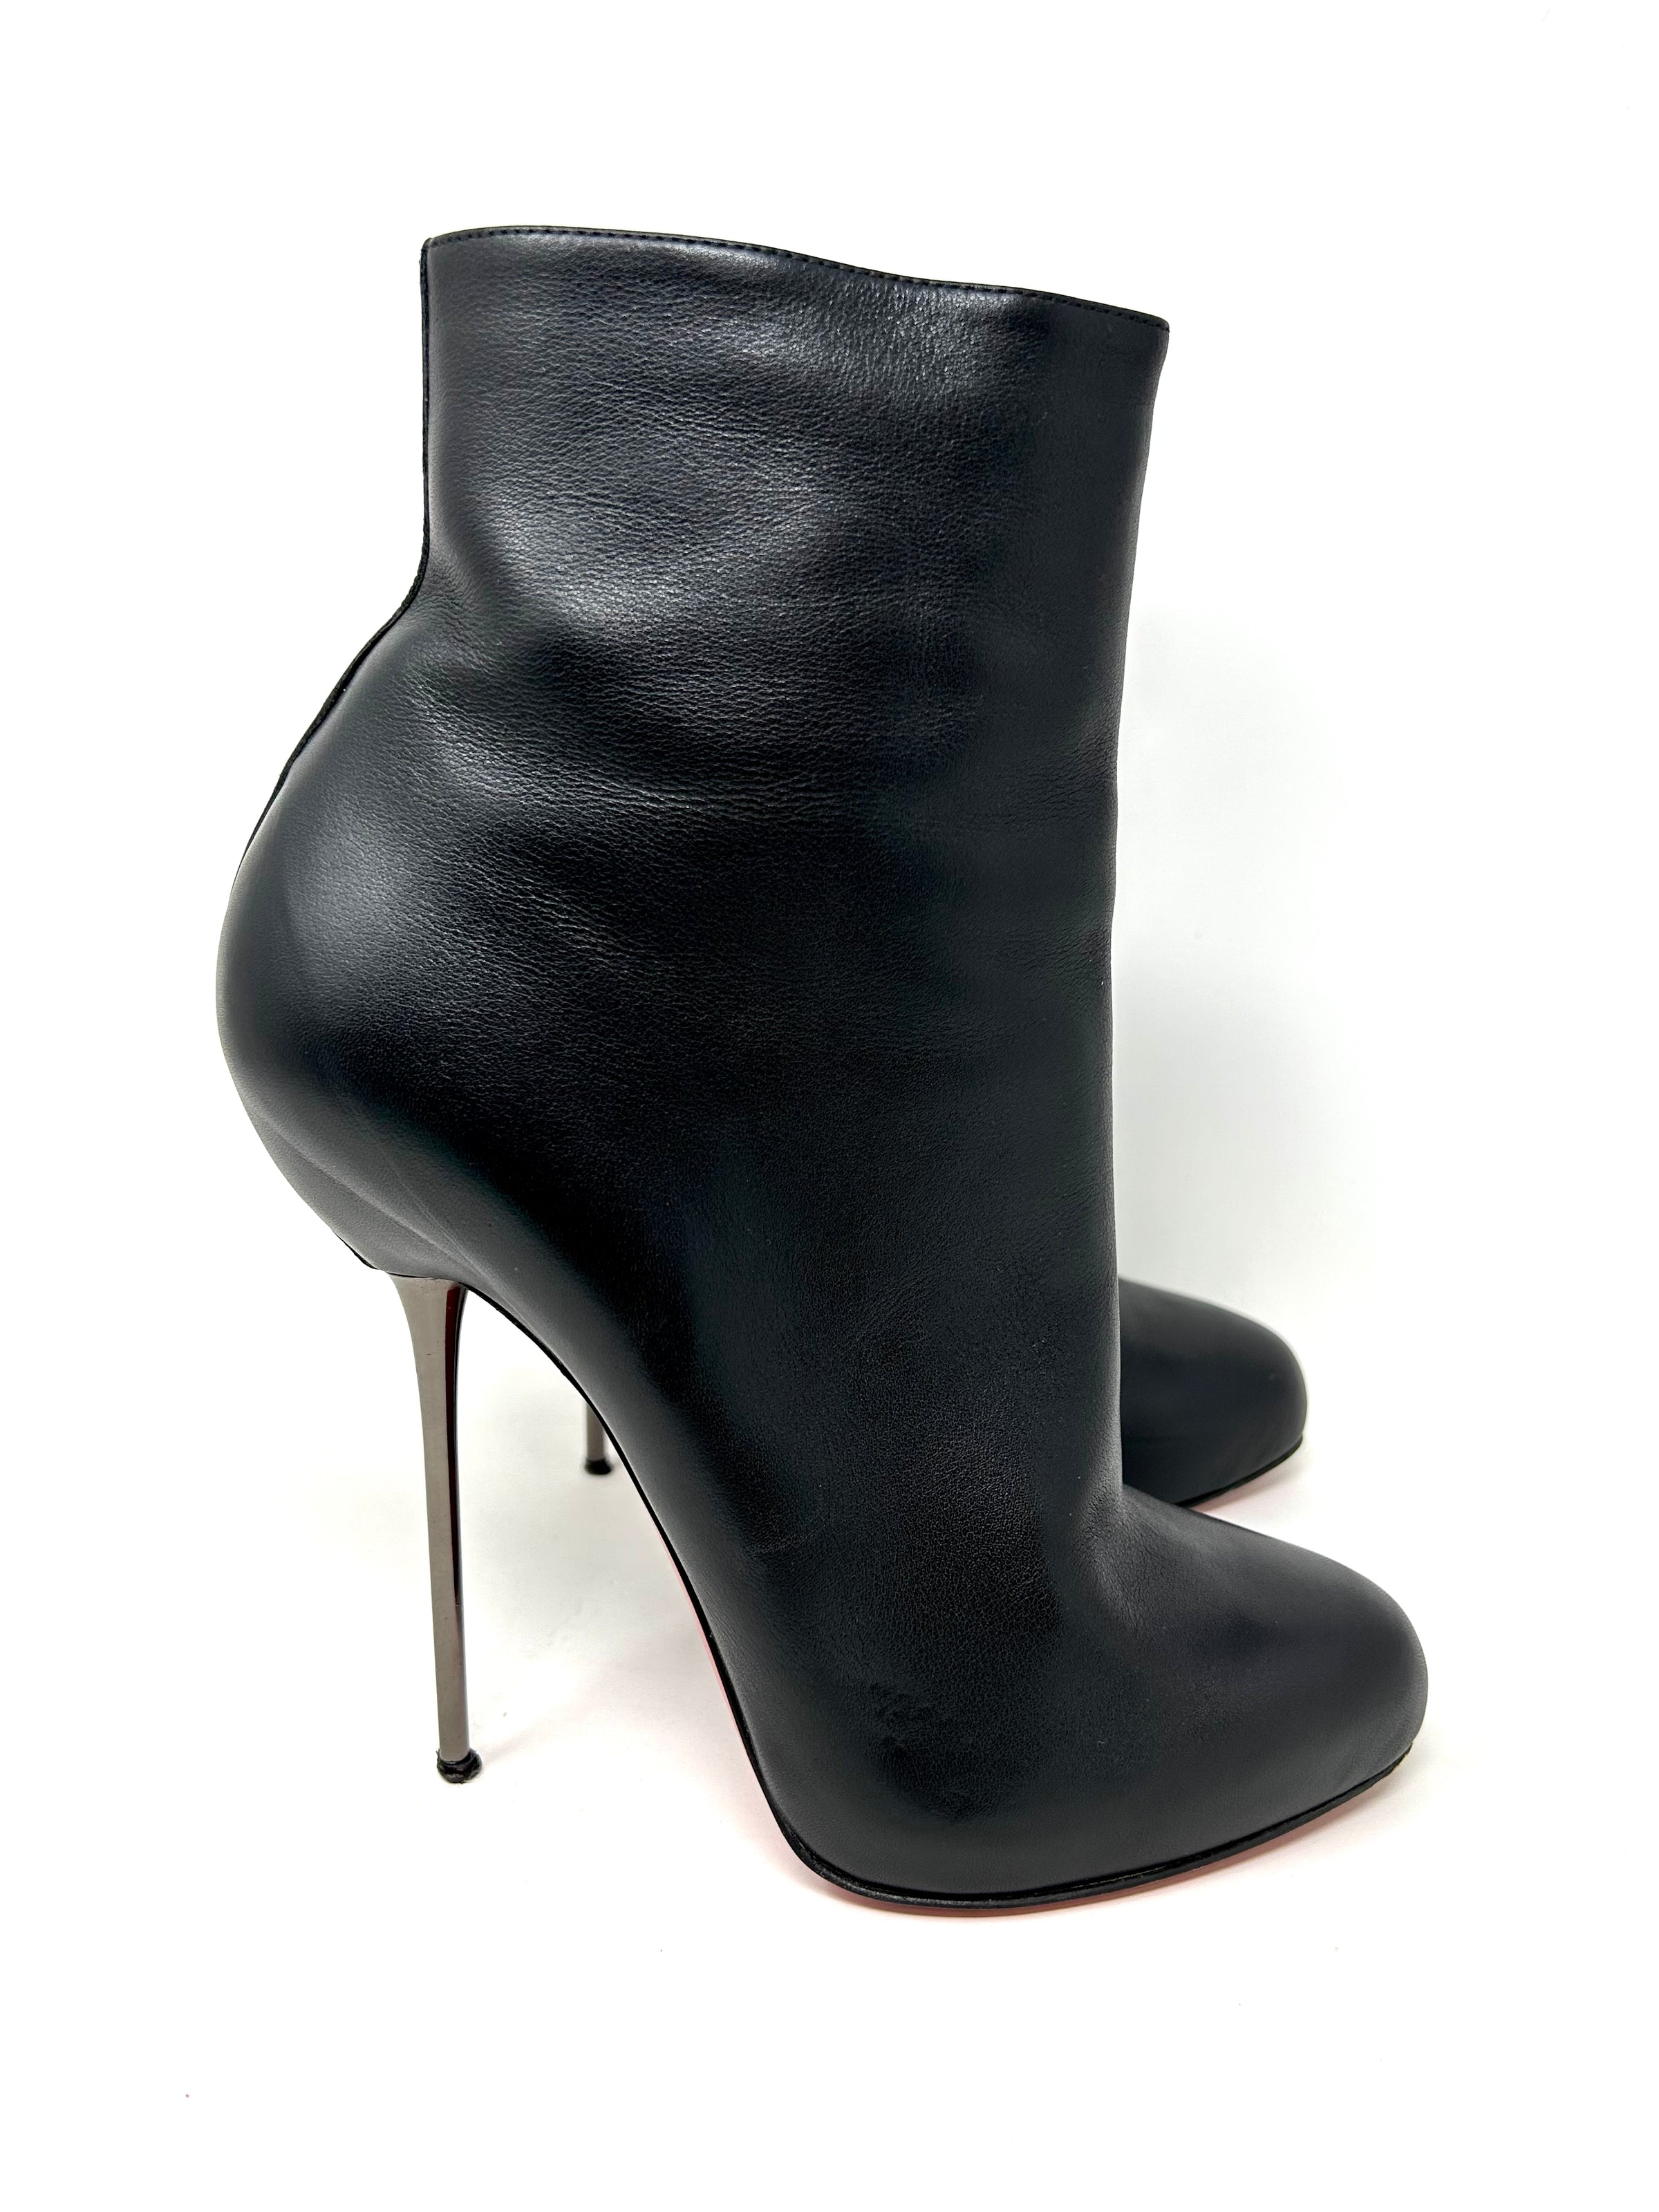 Christian Louboutin Authenticated Ankle Boots